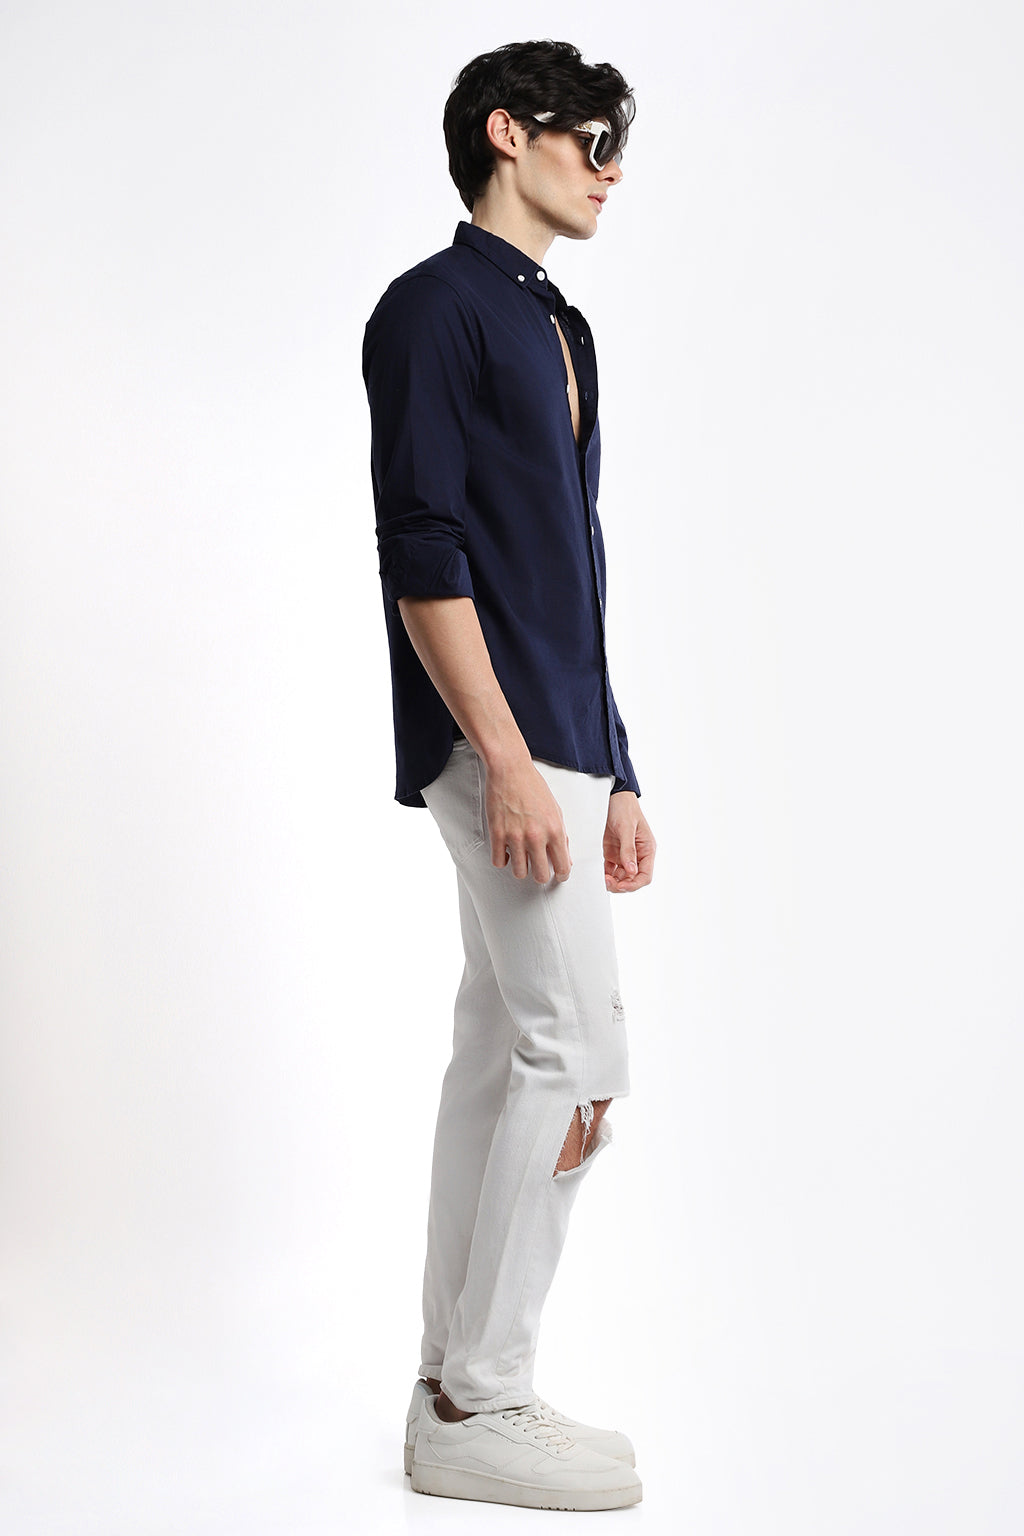 SOLID NAVY BLUE COTTON SHIRT